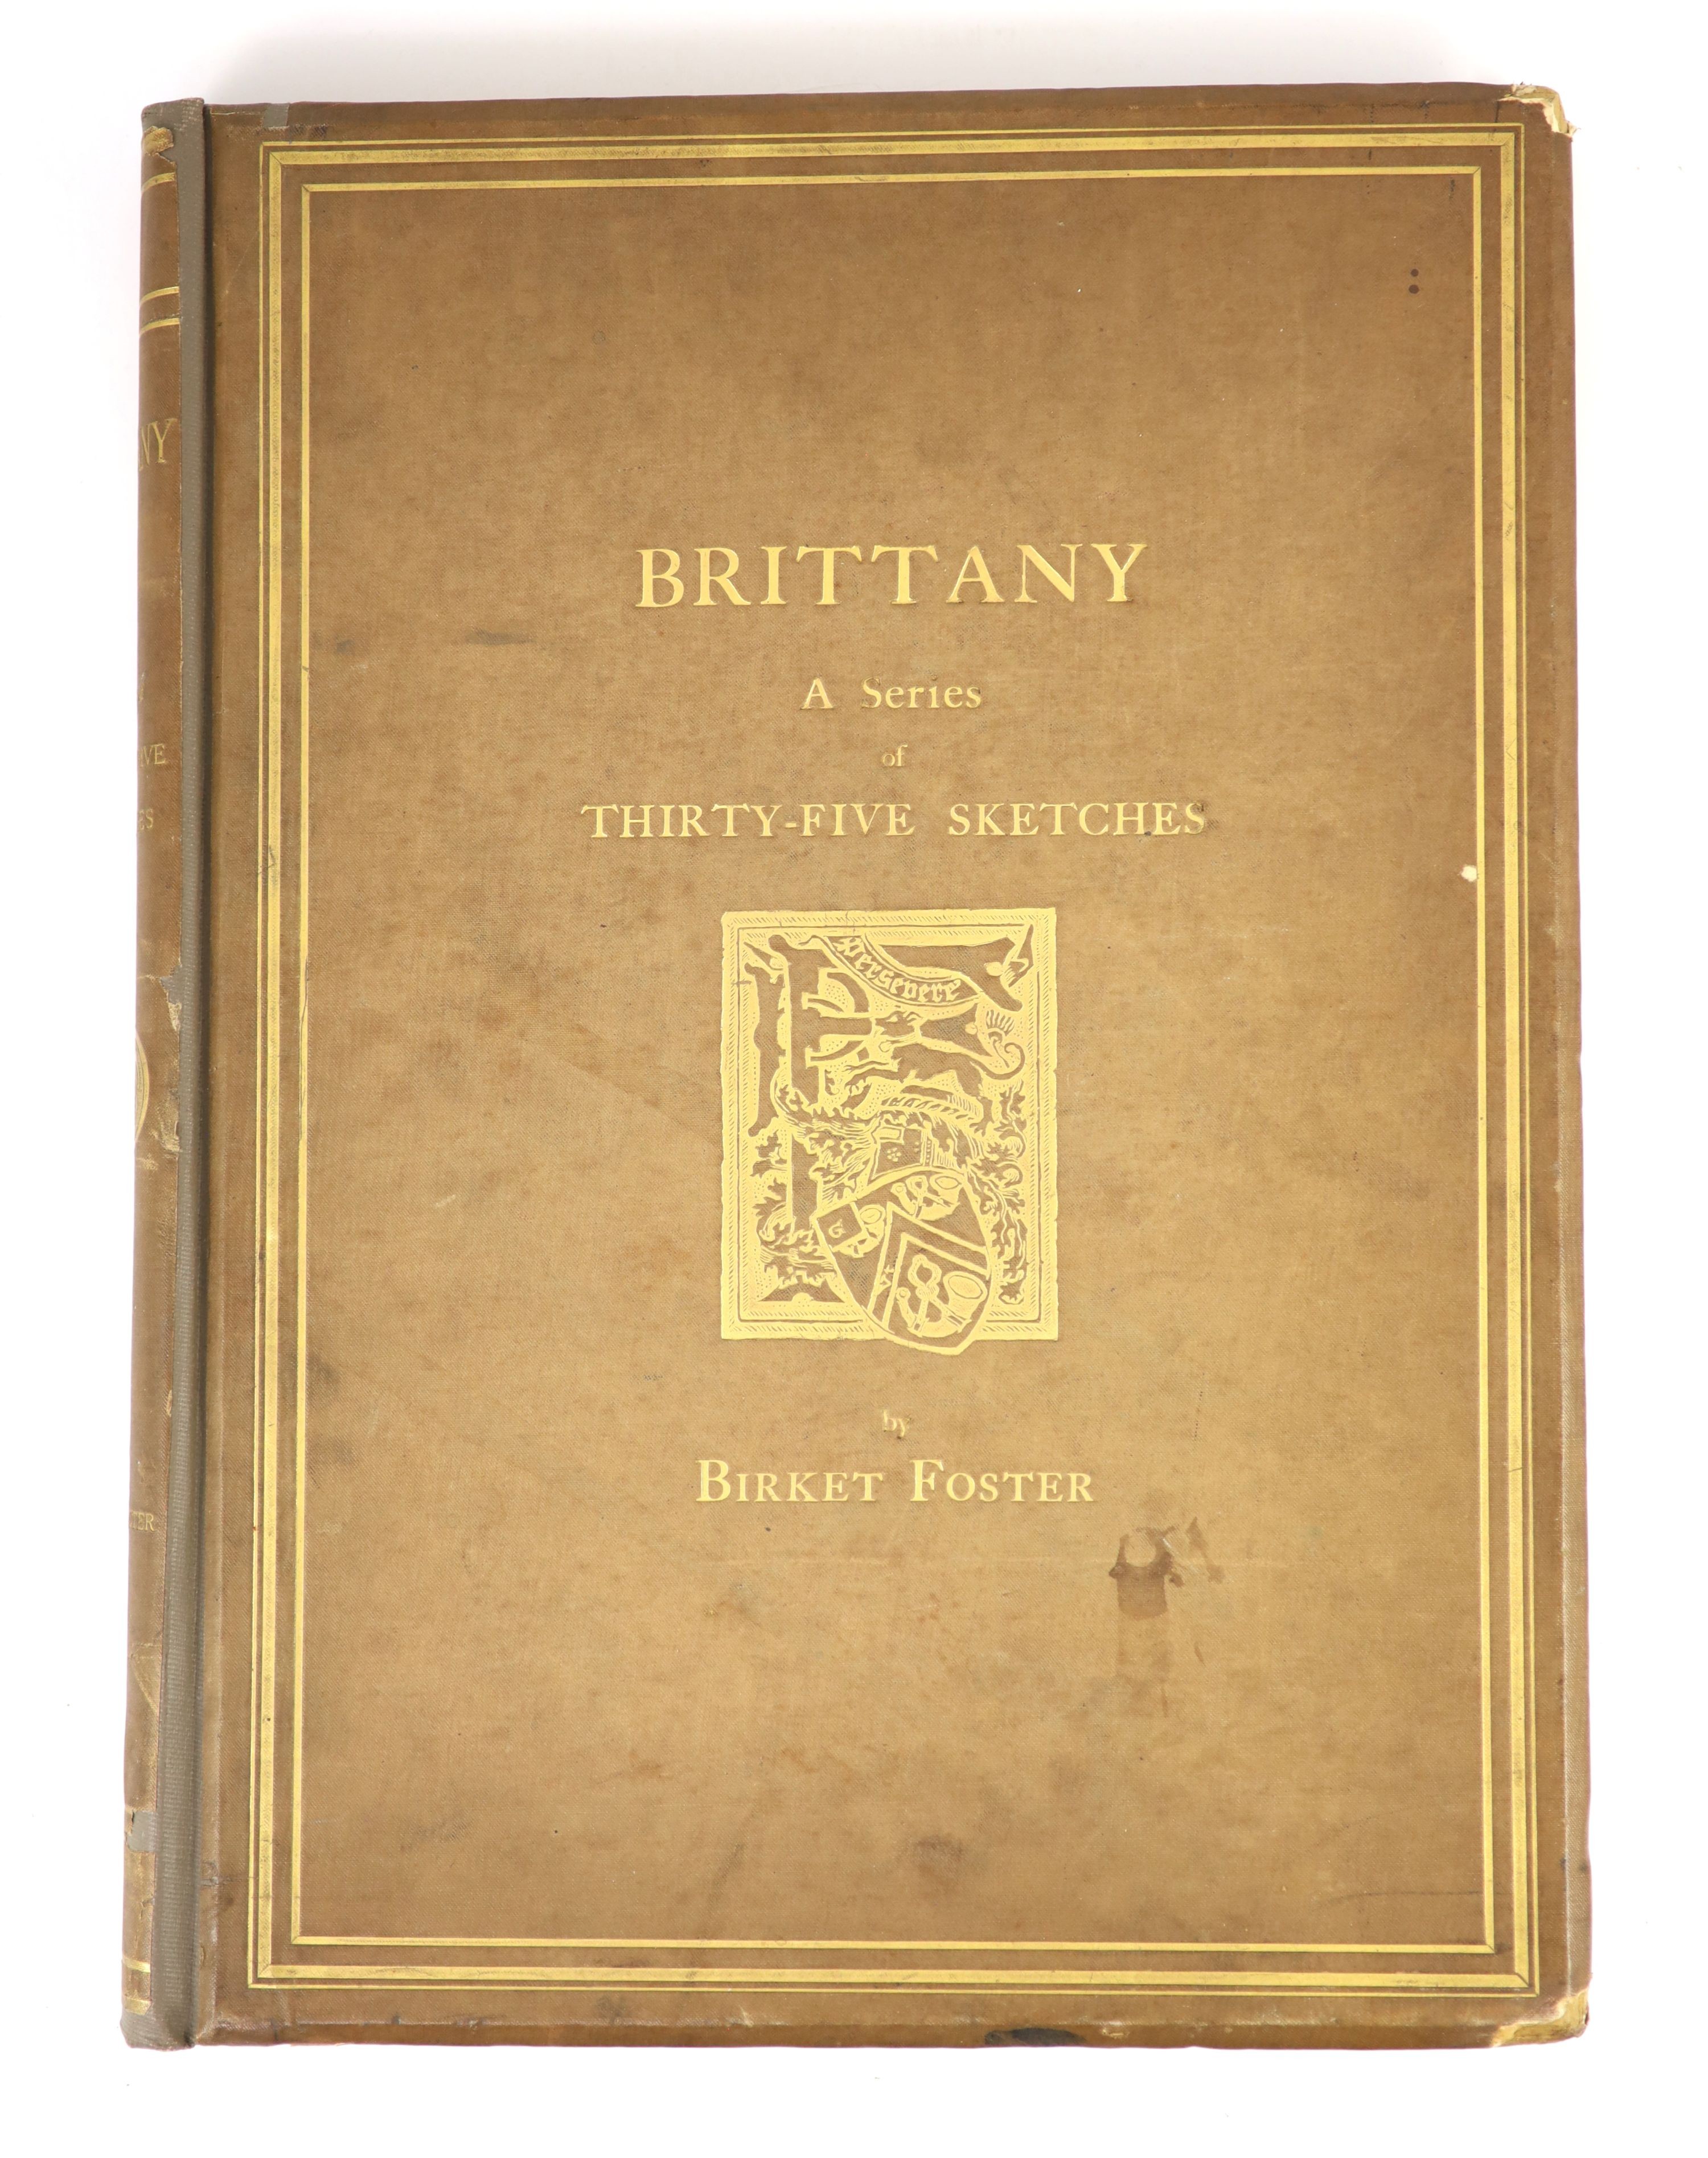 Foster, Birkett. Brittany A Series of Thirty-Five Sketches. Published by the Artist, The Hill, Witley, Surrey. 1878. Folio, original cloth binding, neatly re-backed, corners bumped, page margins with some foxing not affe